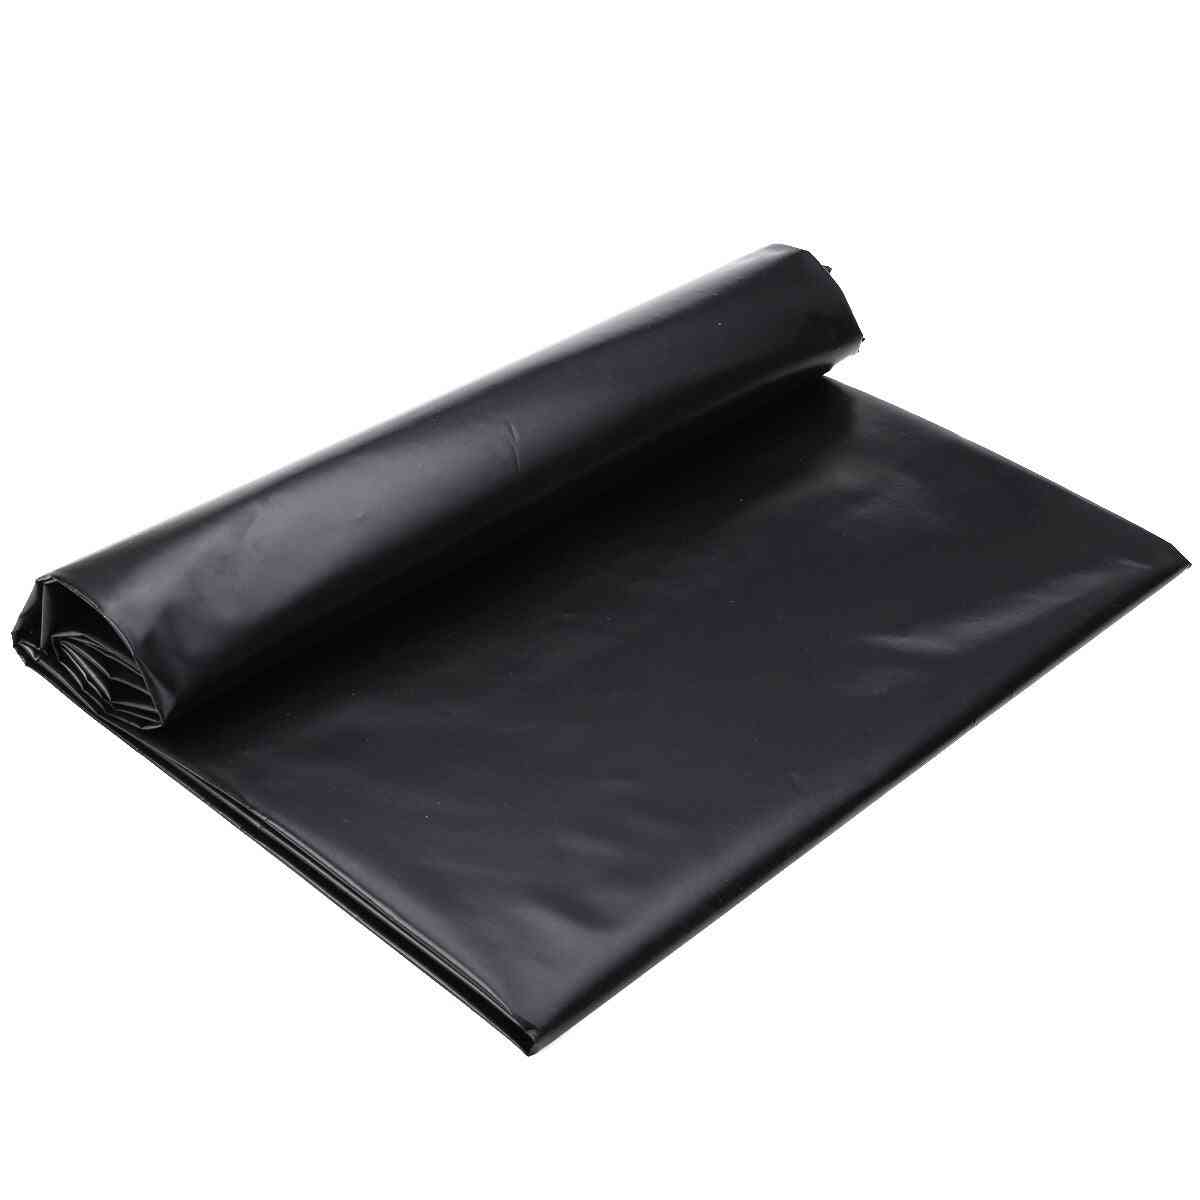 Fish Pond Liner Garden Pools, Hdpe Membrane Reinforced, Landscaping Pool, Waterproof Cloth